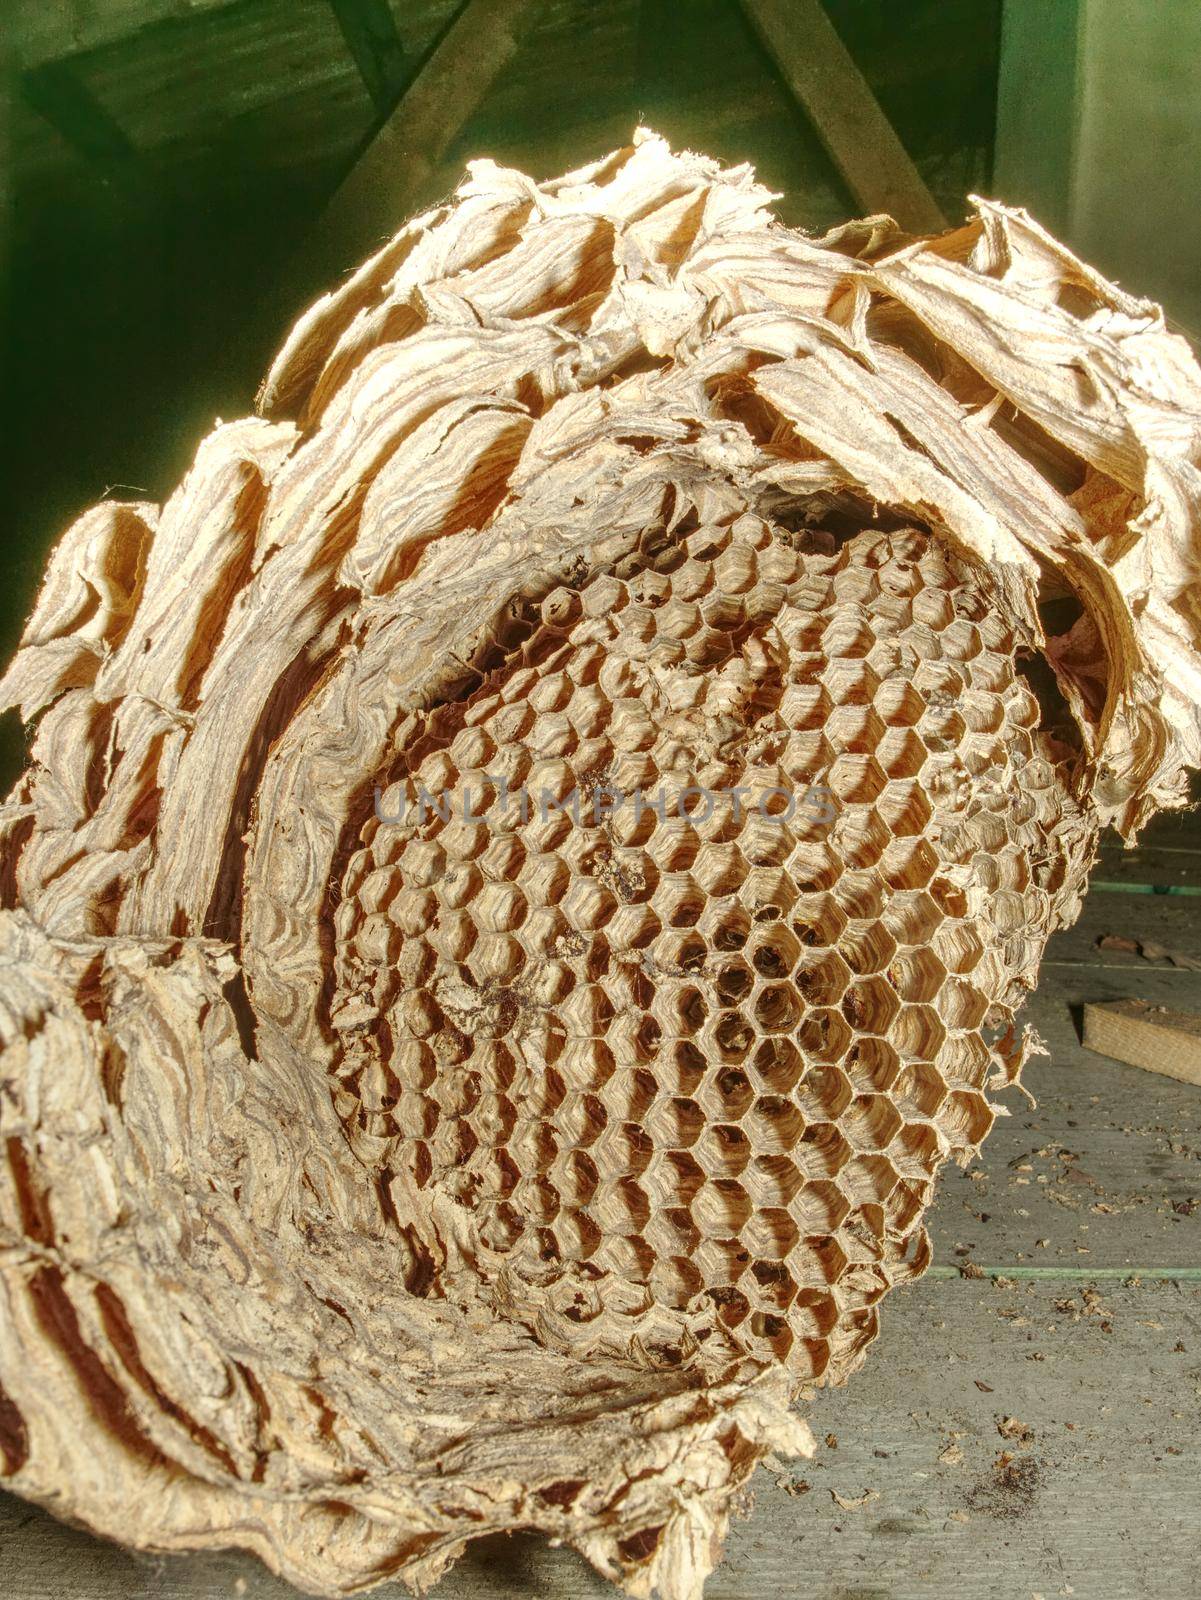 Abandoned european wasp nest in house. by rdonar2